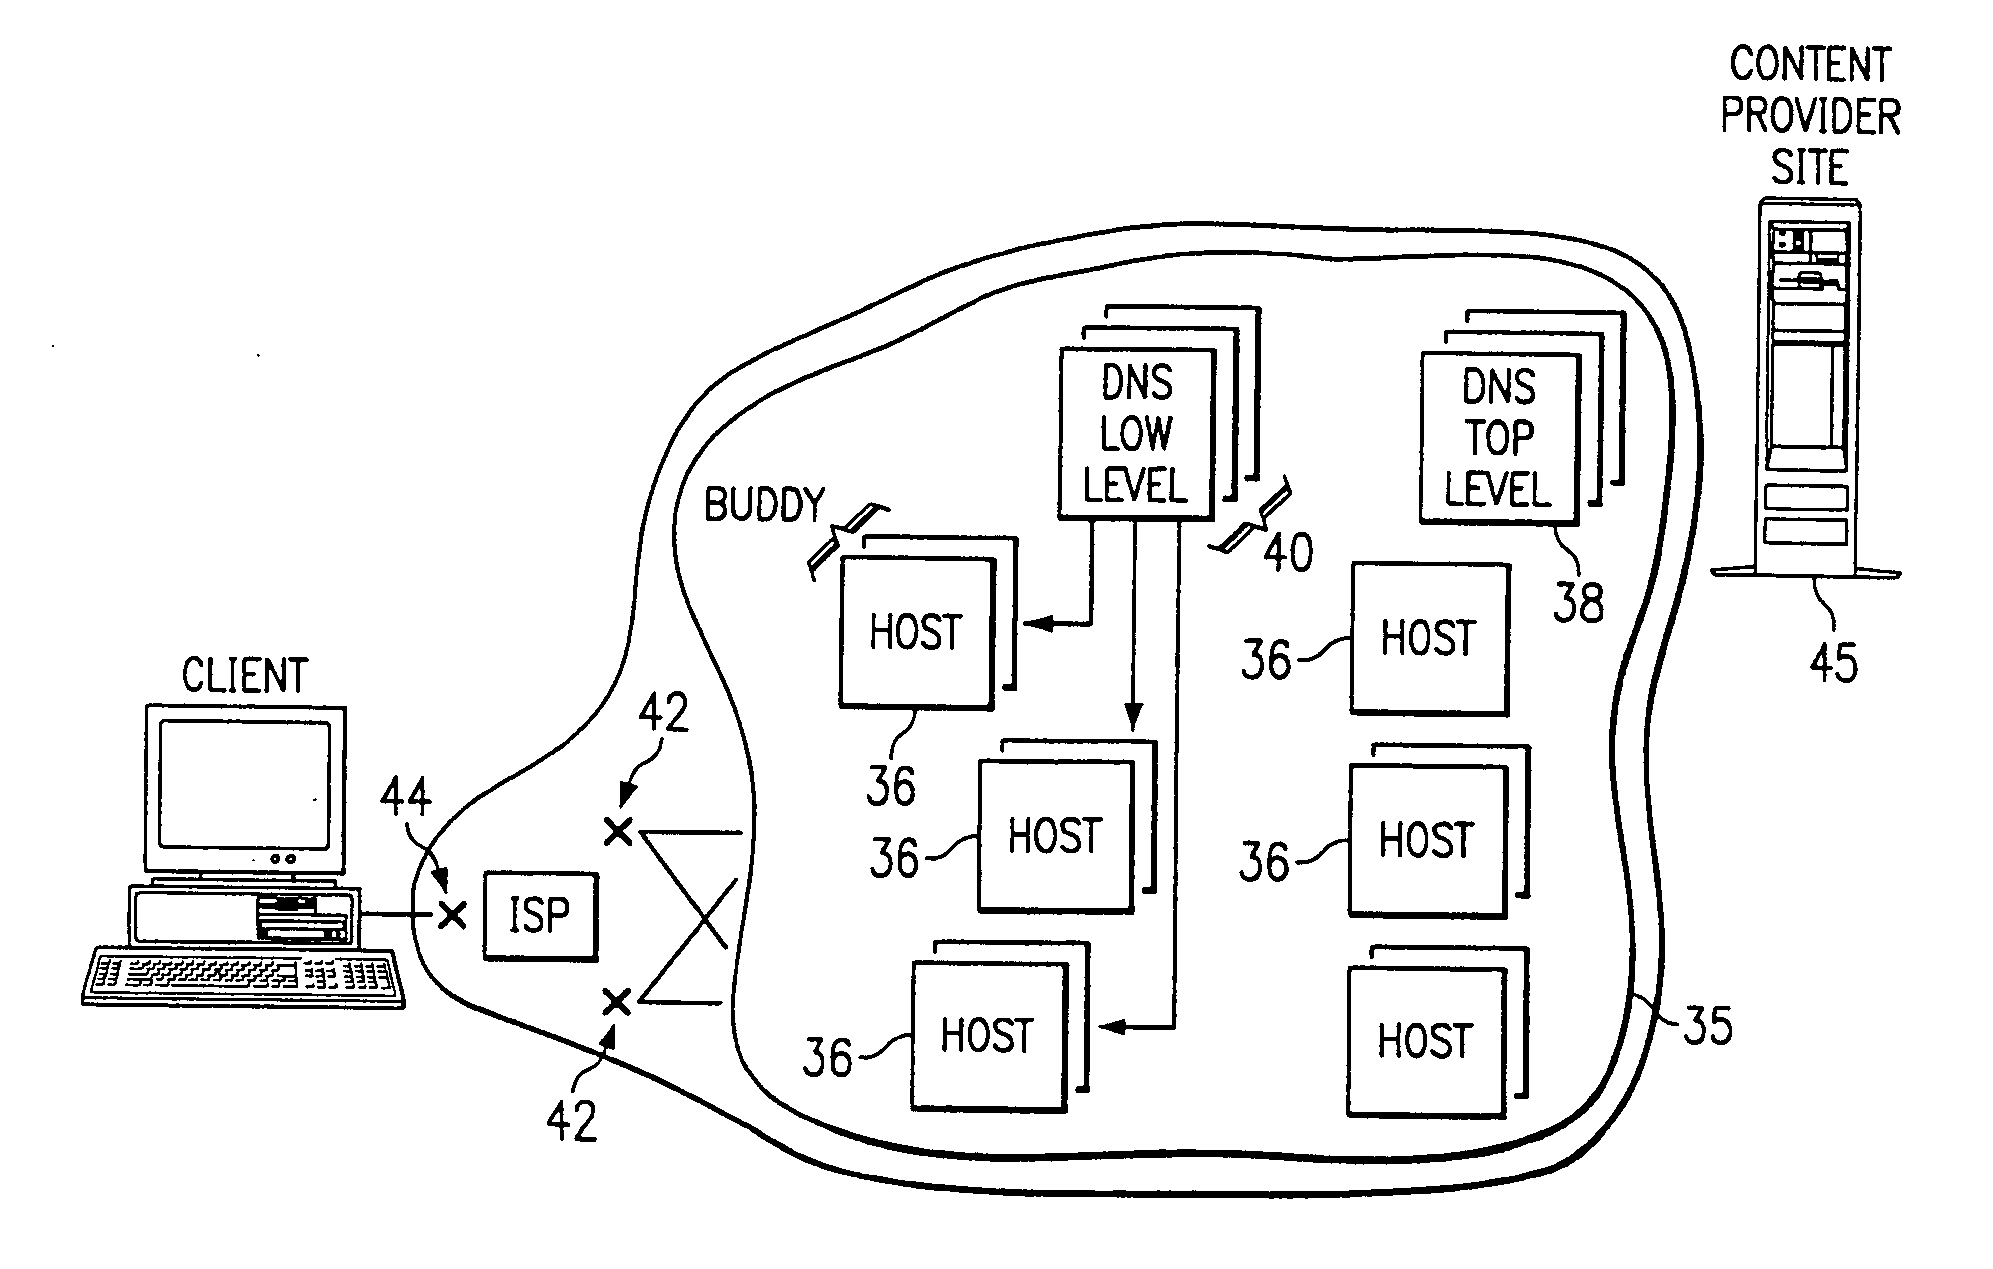 Content distribution system using an alternative domain name system (DNS) and content servers